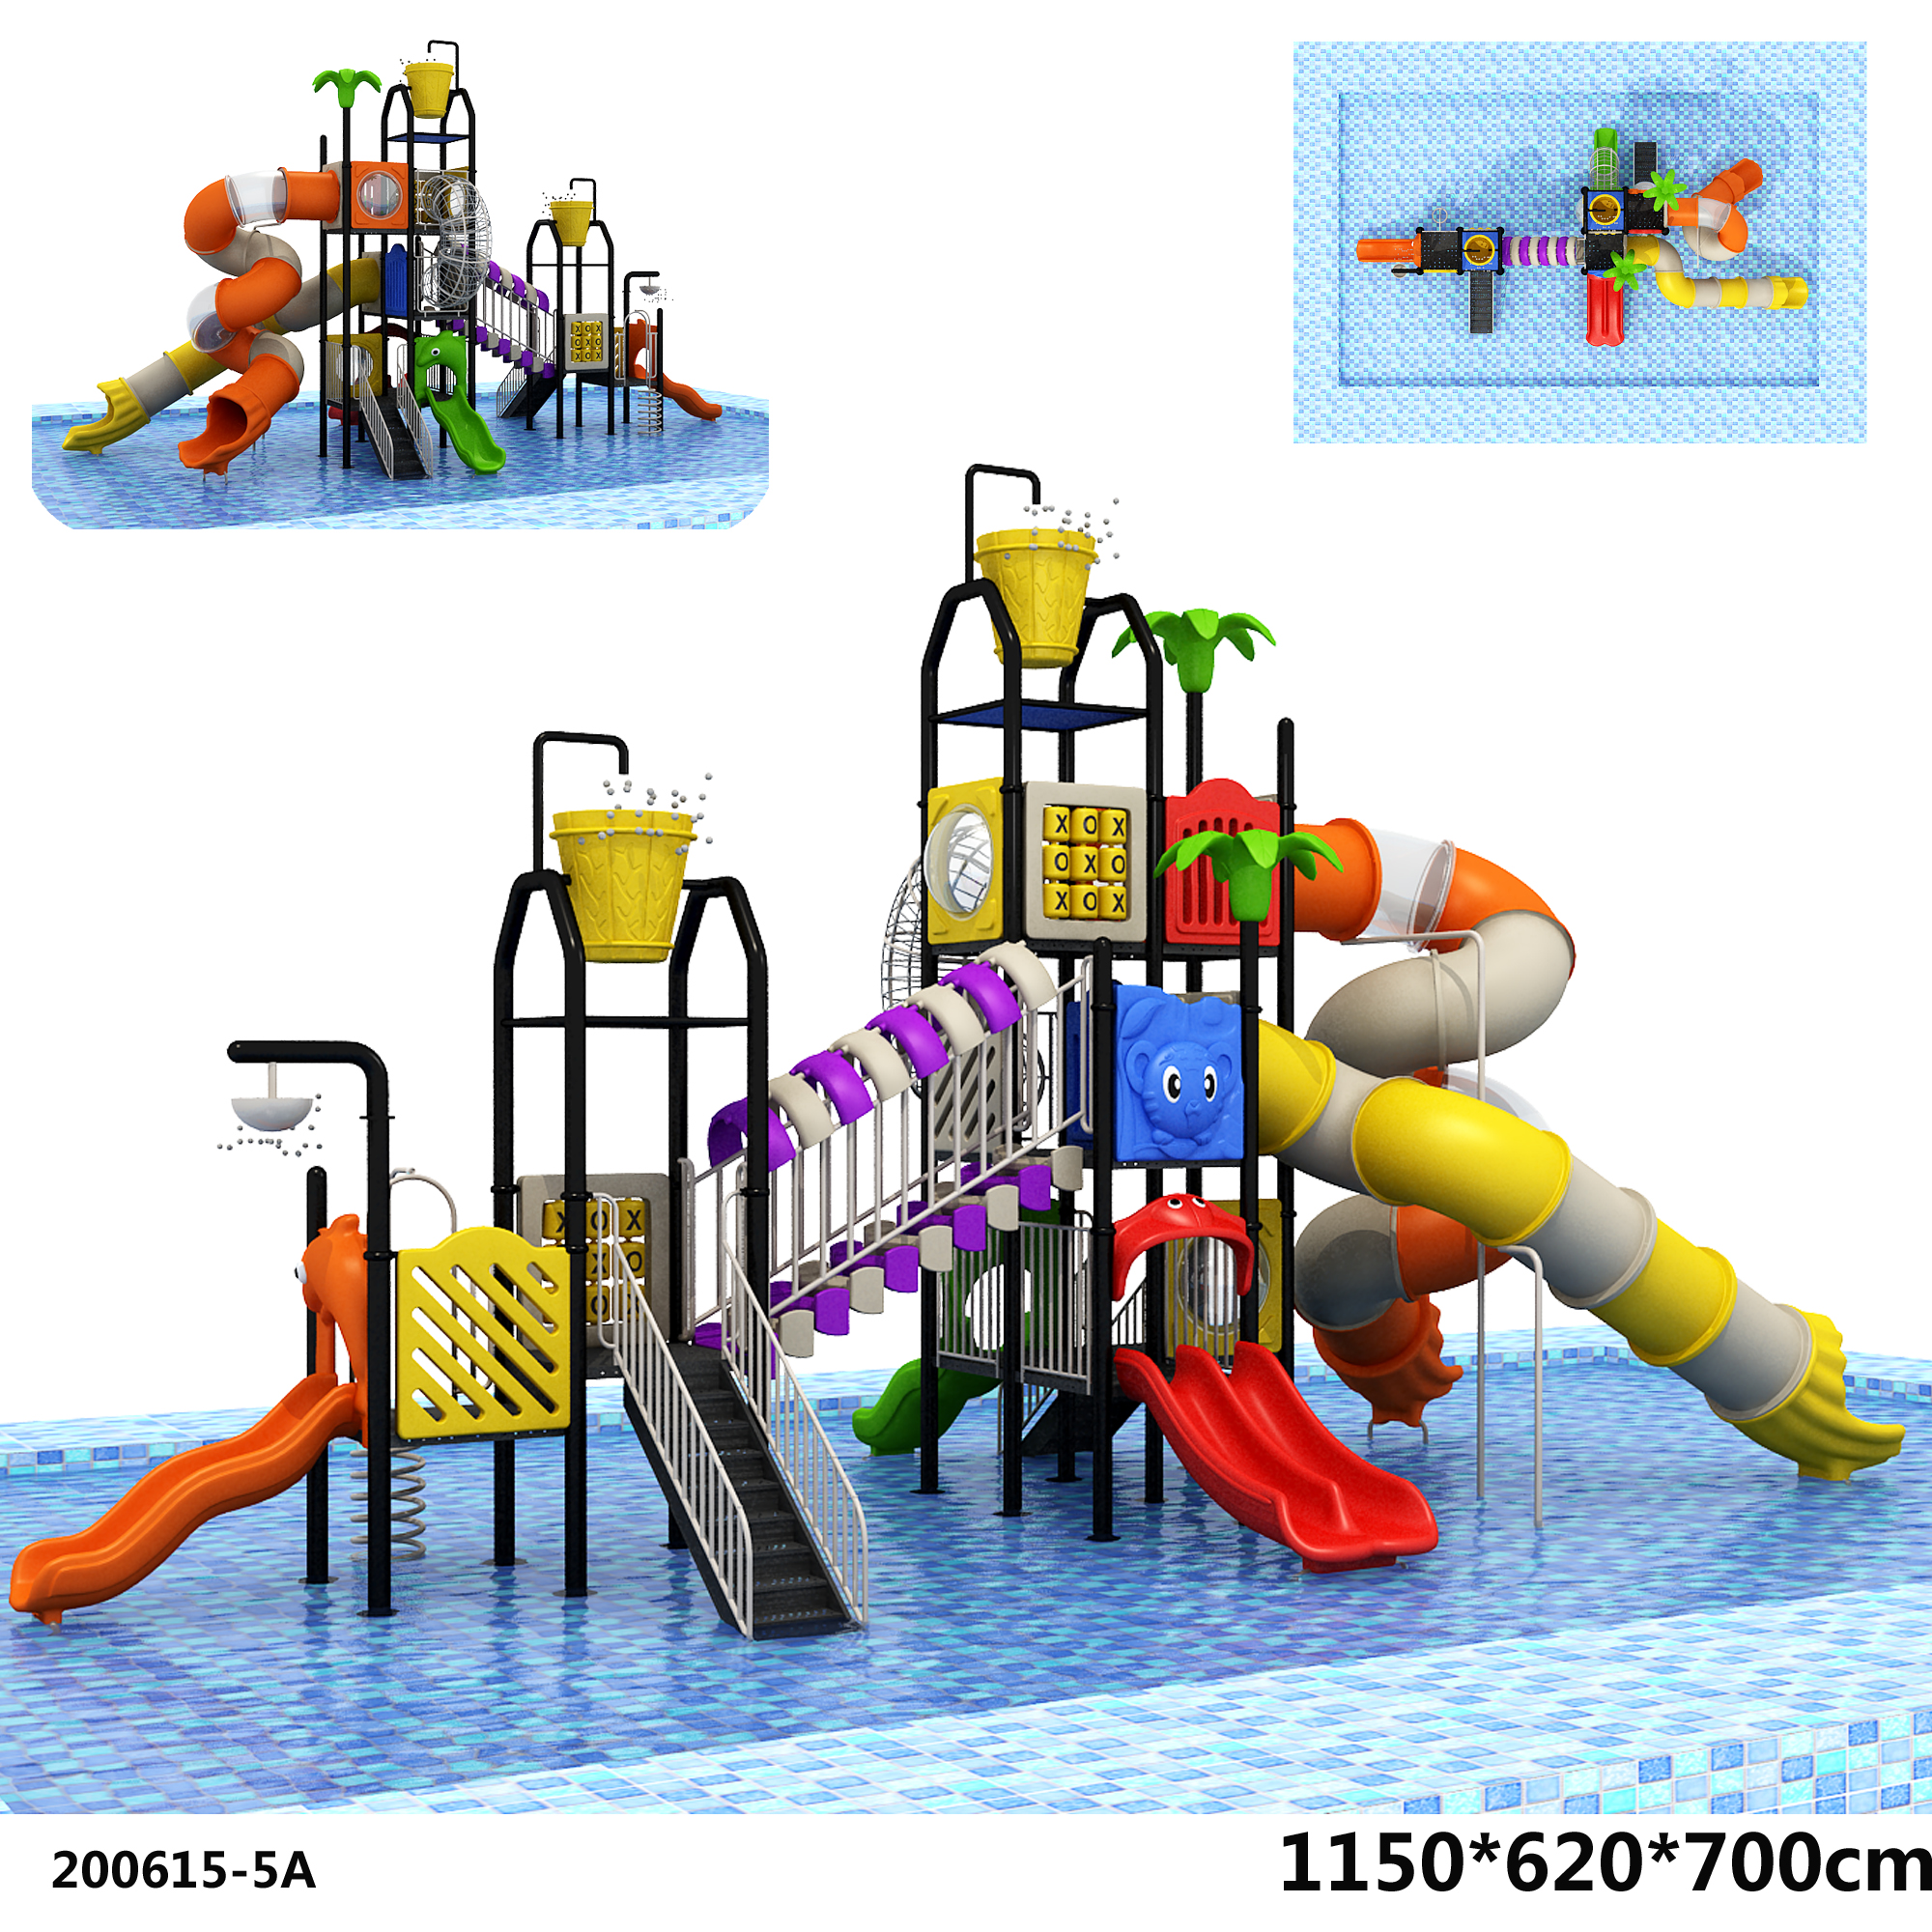 How to Design Better Water Playgrounds for Kids 